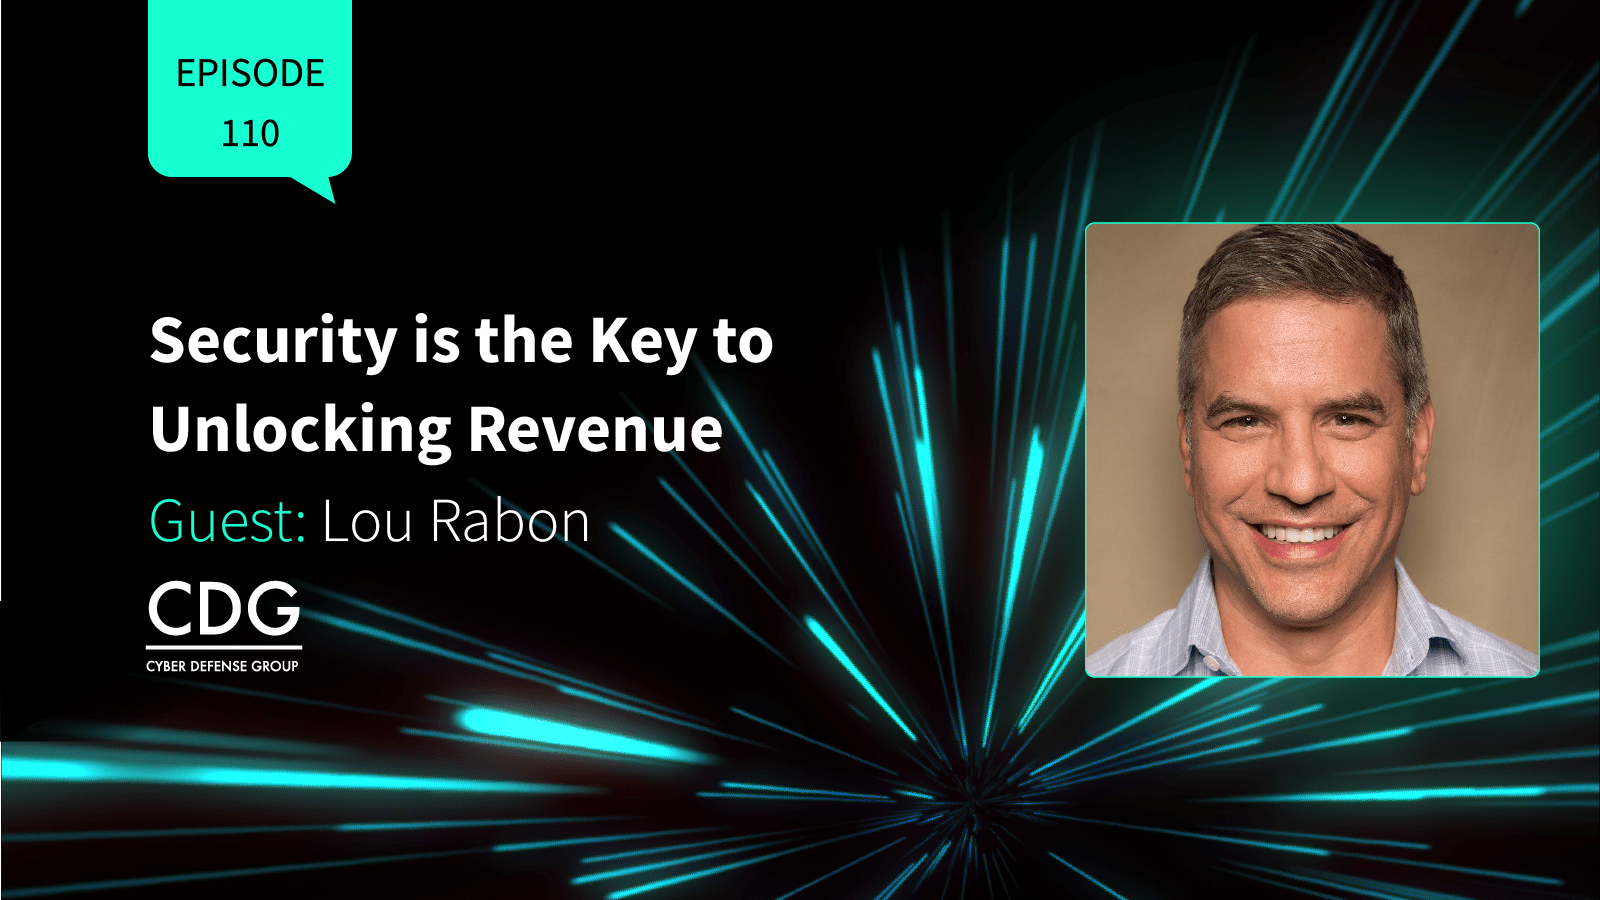 Security is the key to unlocking revenue with guest Lou Rabon